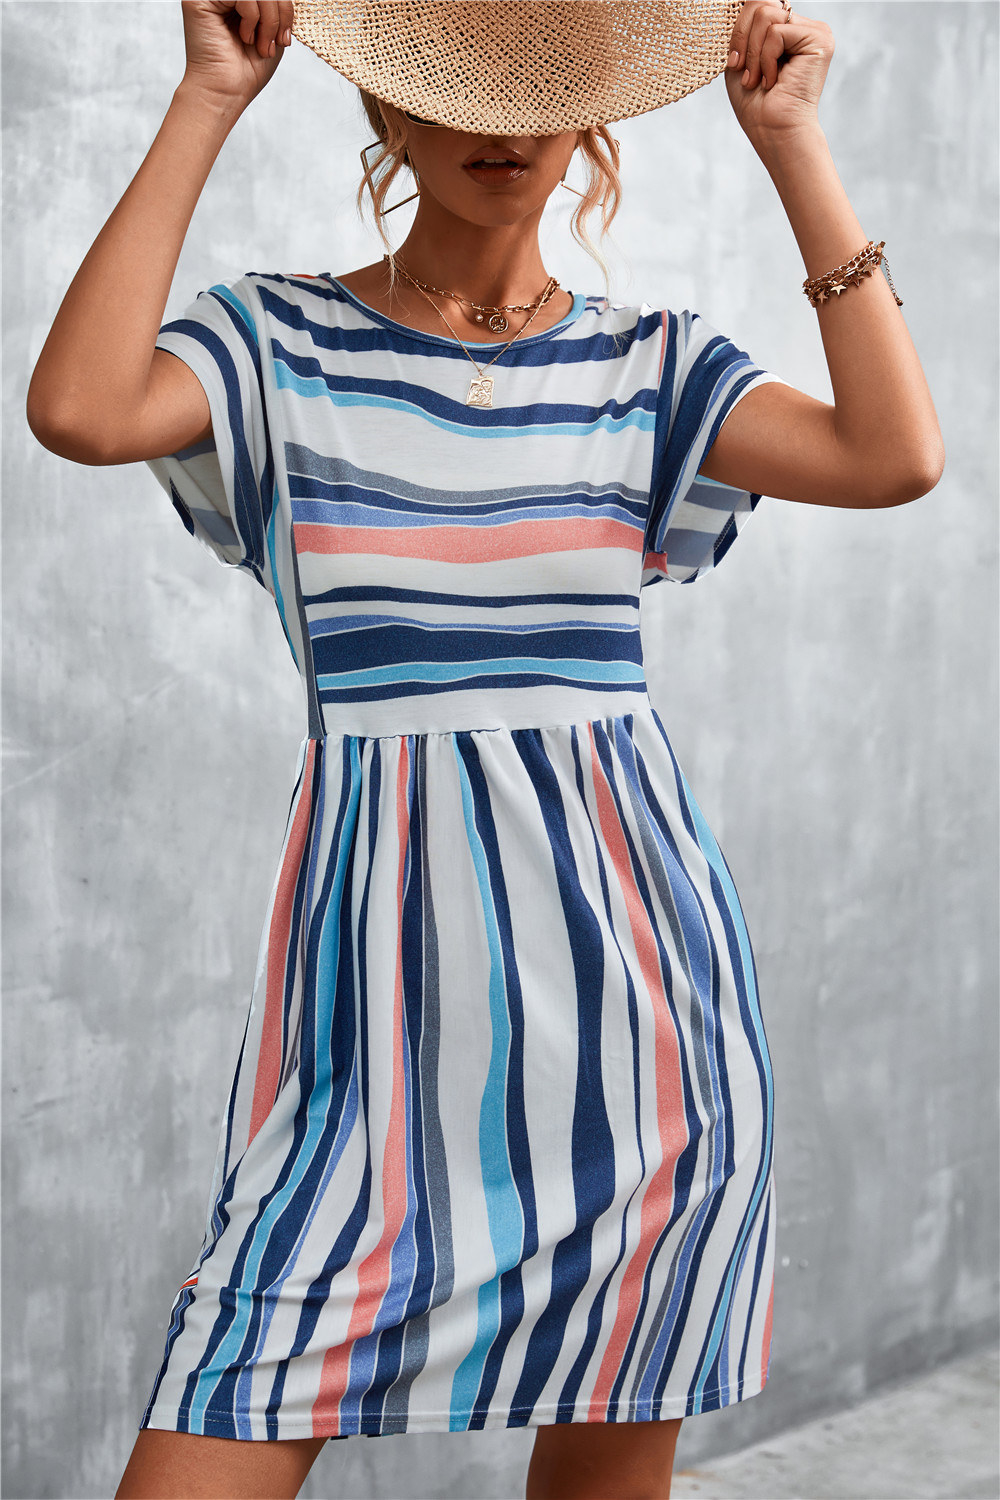 model wearing the pink, white, blue and gray striped dress